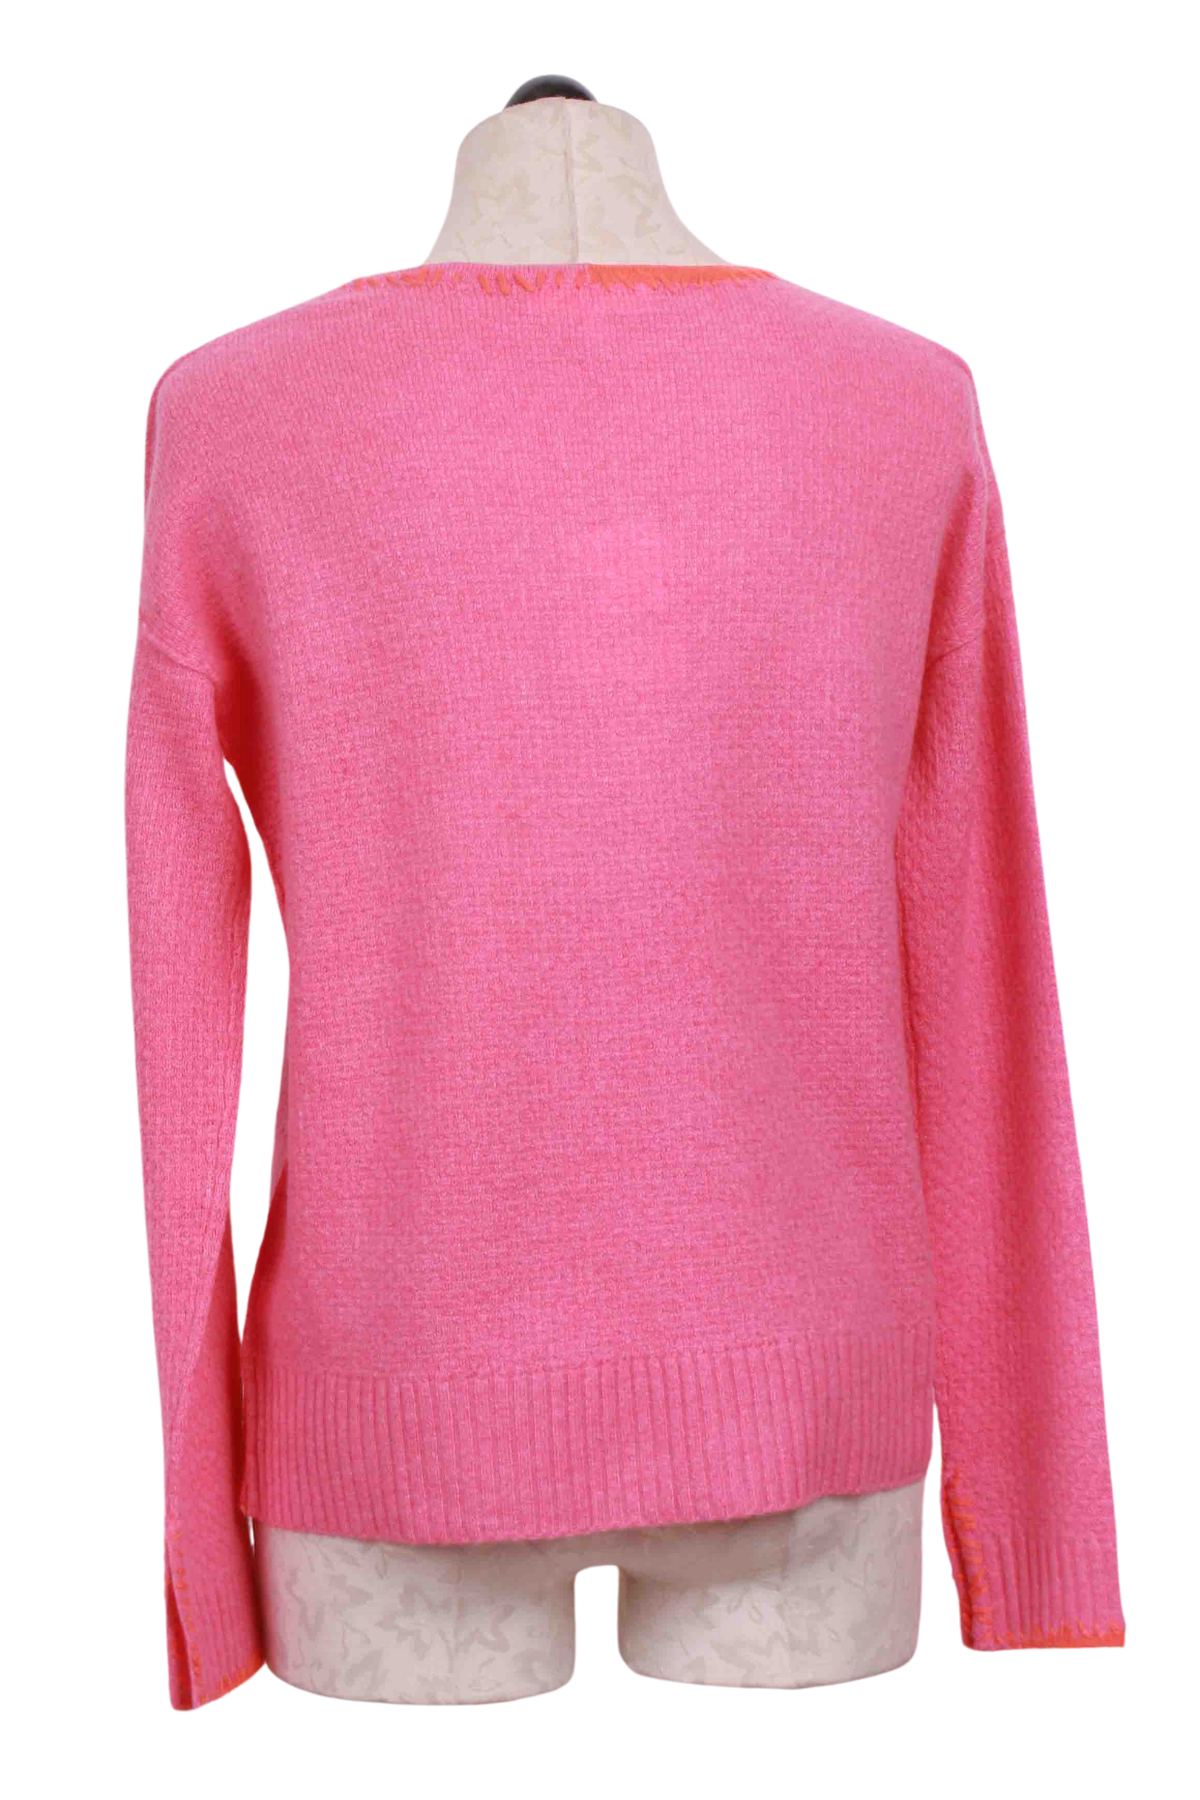 back view of Split Decision Crew Neck Sweater by Lisa Todd in Pink Punch